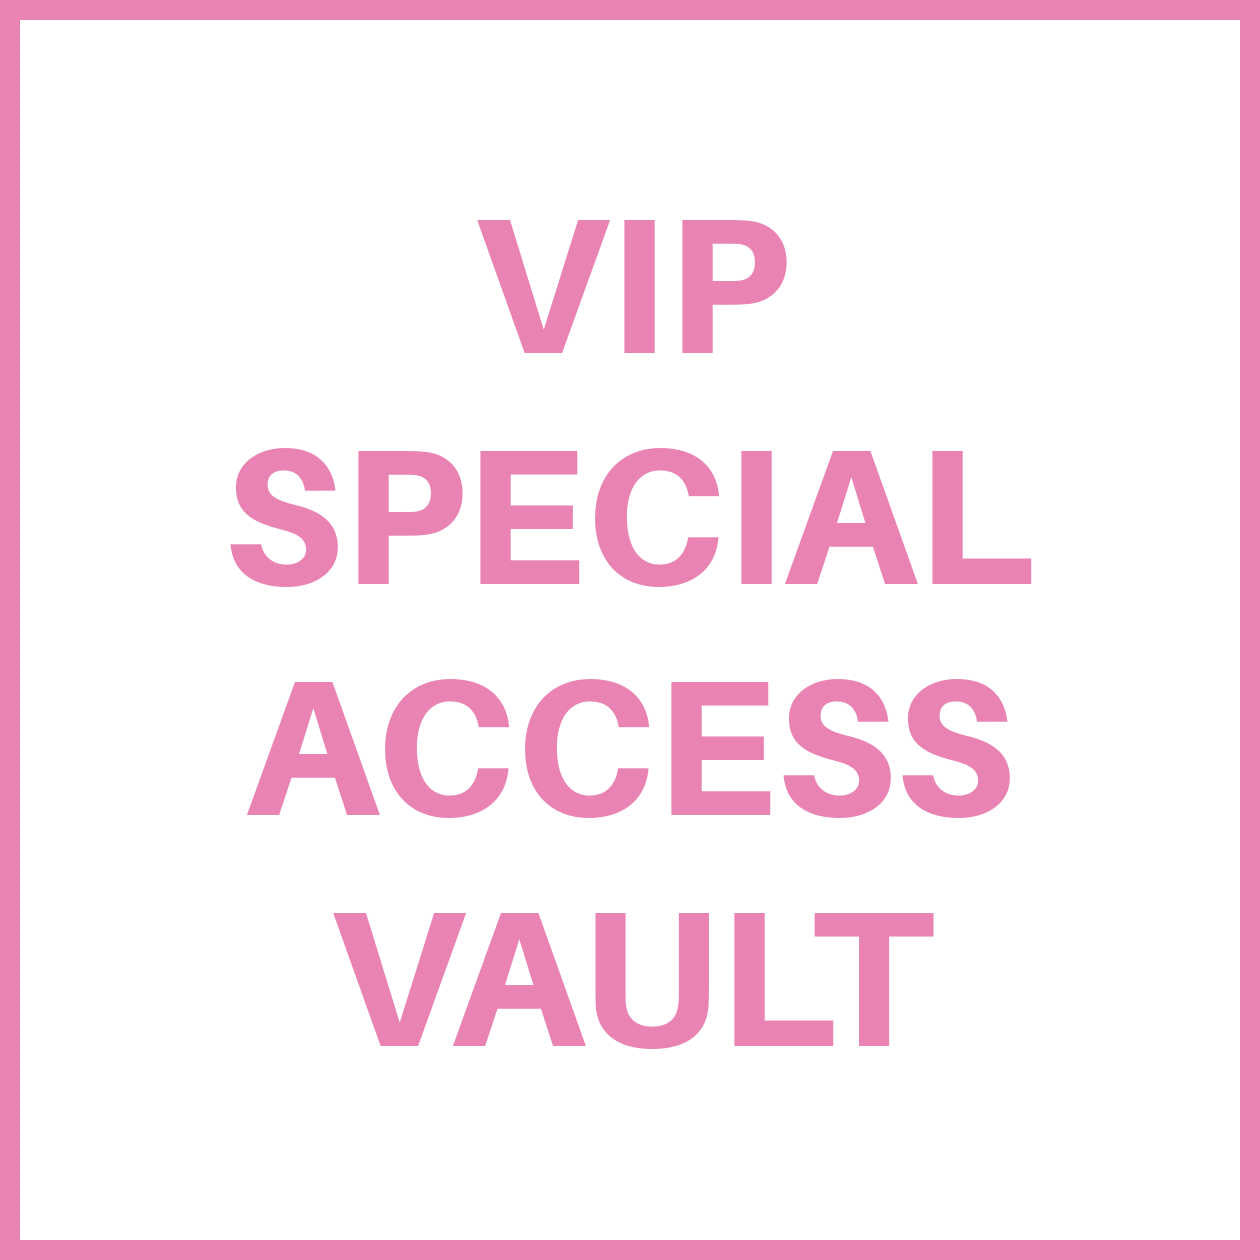 VIP SPECIAL ACCESS